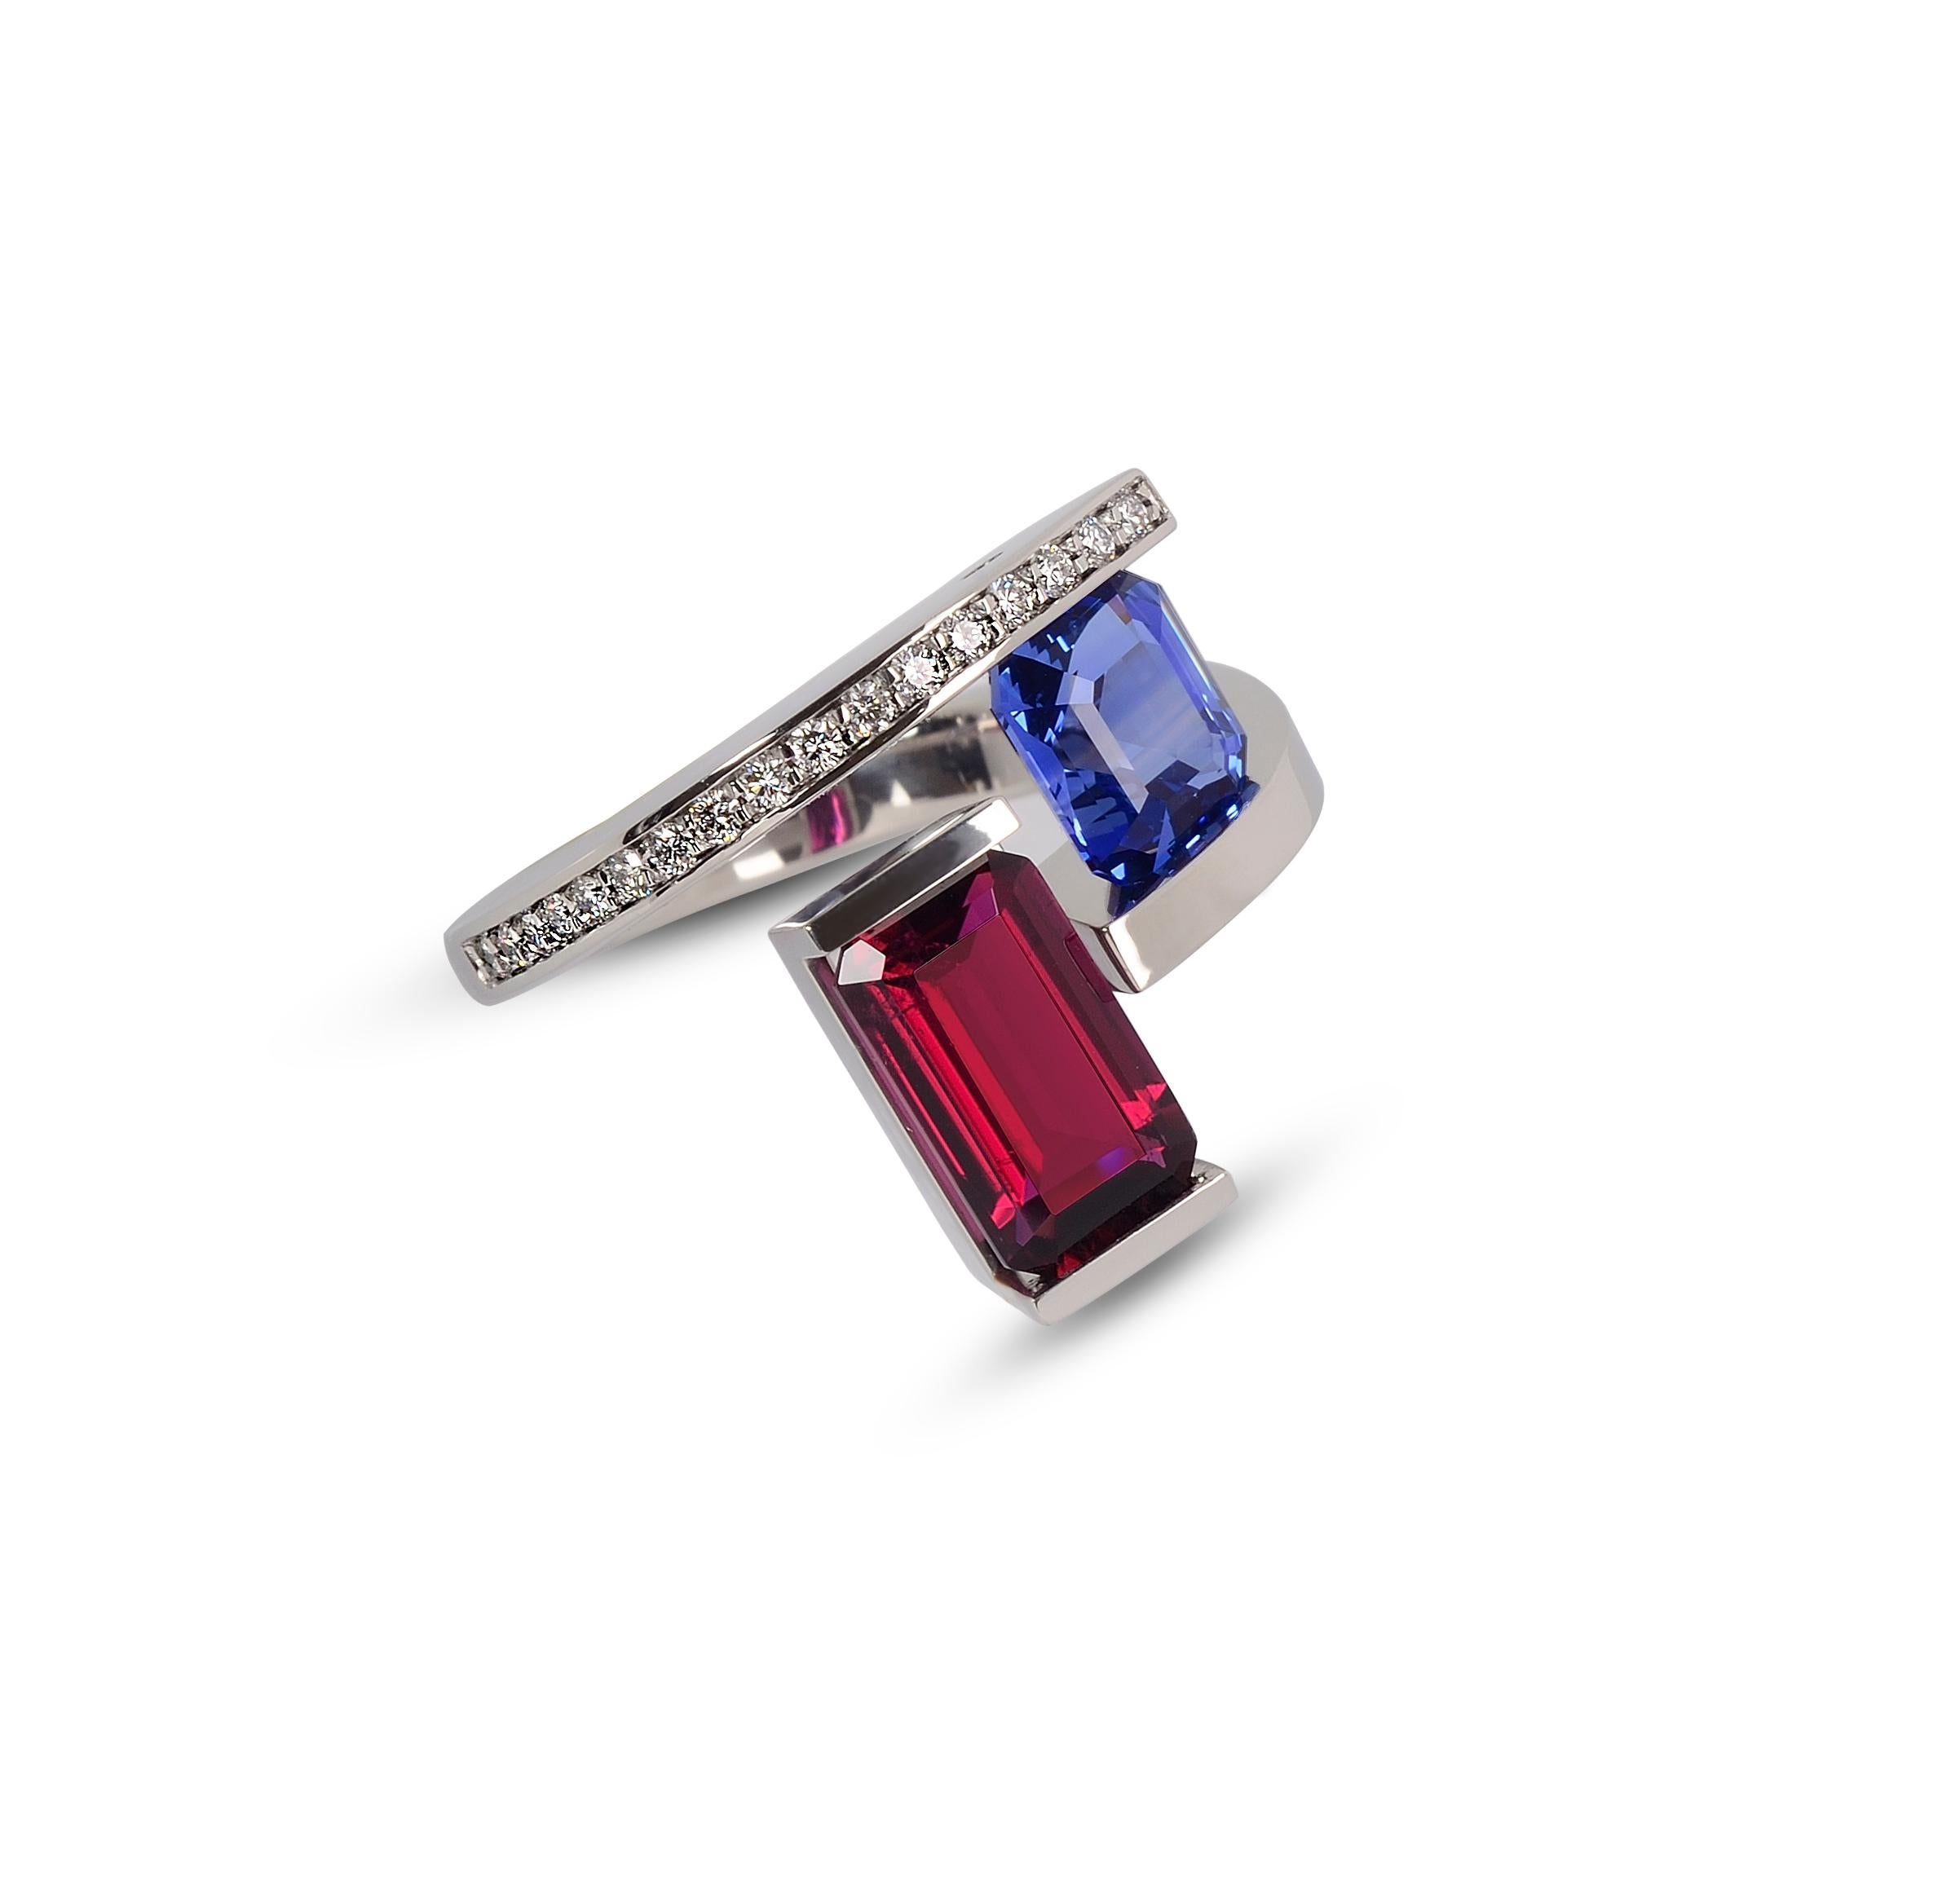 The 2-Stone Helix Ring with Rubellite and blue sapphire is handcrafted in platinum with custom 24k crystalized gold inlay accents. The ring features a 3.44 ct. burgundy rubellite and a tension-set 2.44 ct. medium cornflower blue sapphire. The top of